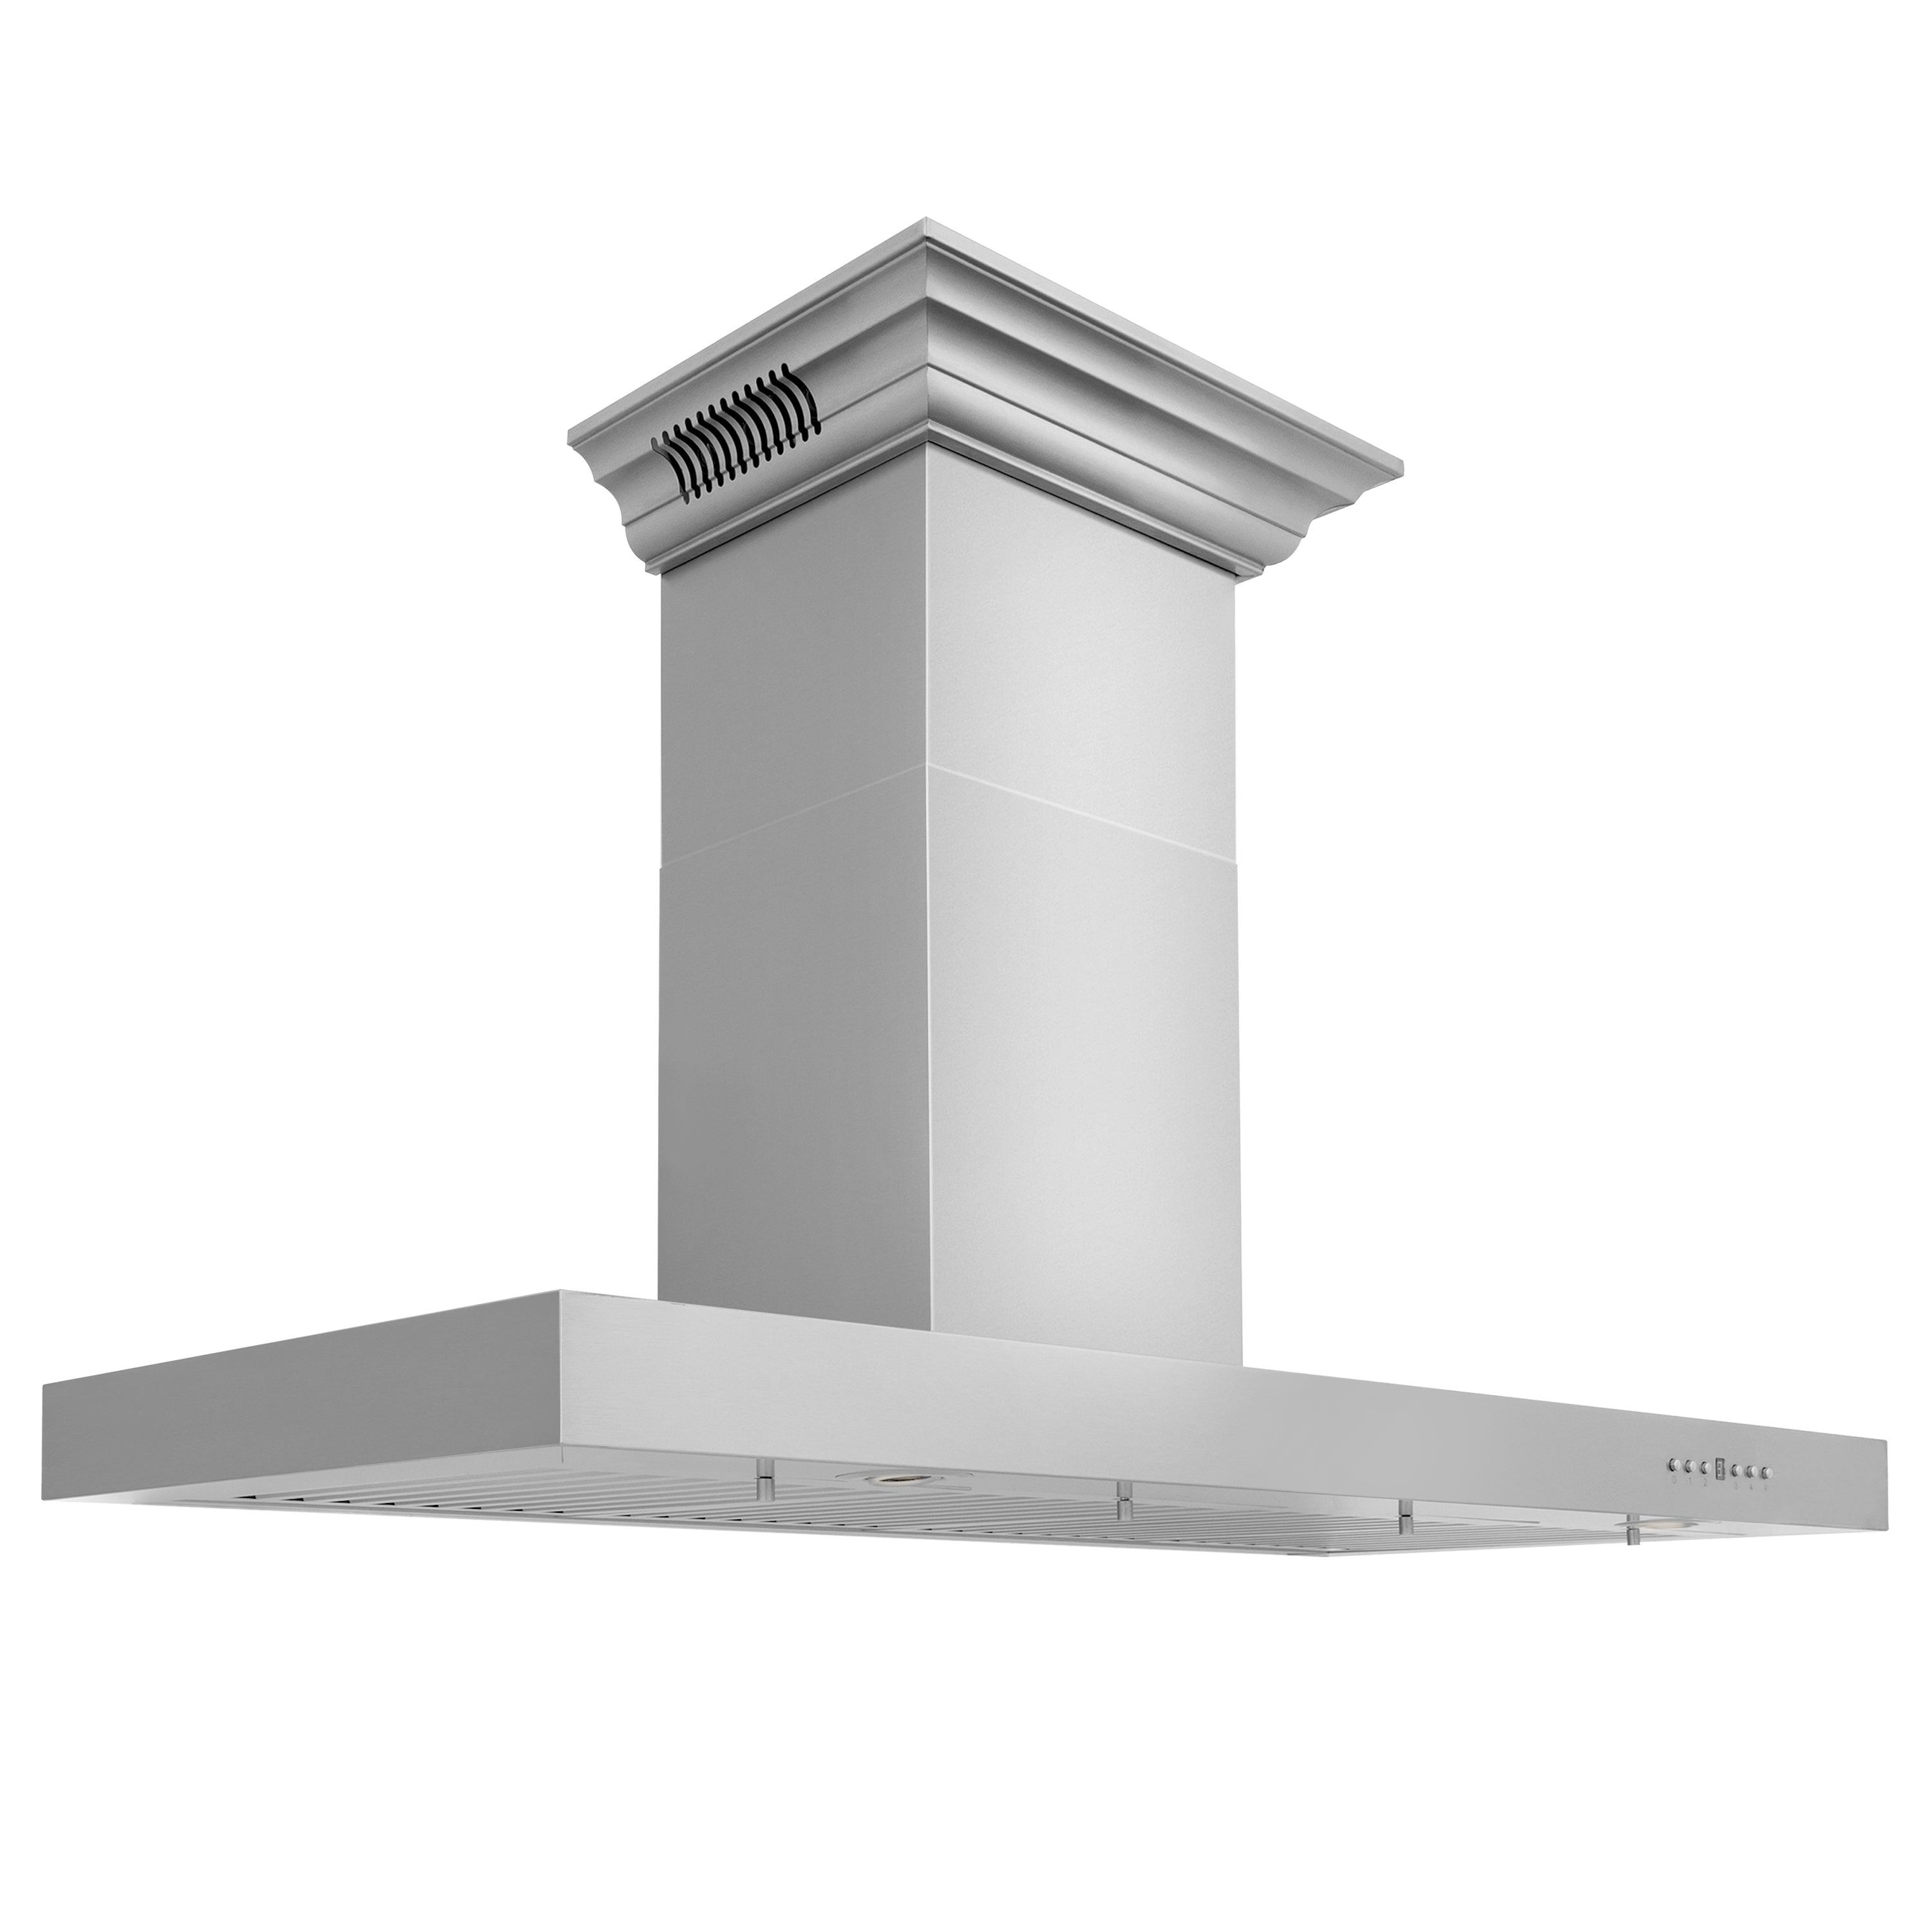 48" ZLINE CrownSound‚ Ducted Vent Wall Mount Range Hood in Stainless Steel with Built-in Bluetooth Speakers (KECRN-BT-48)